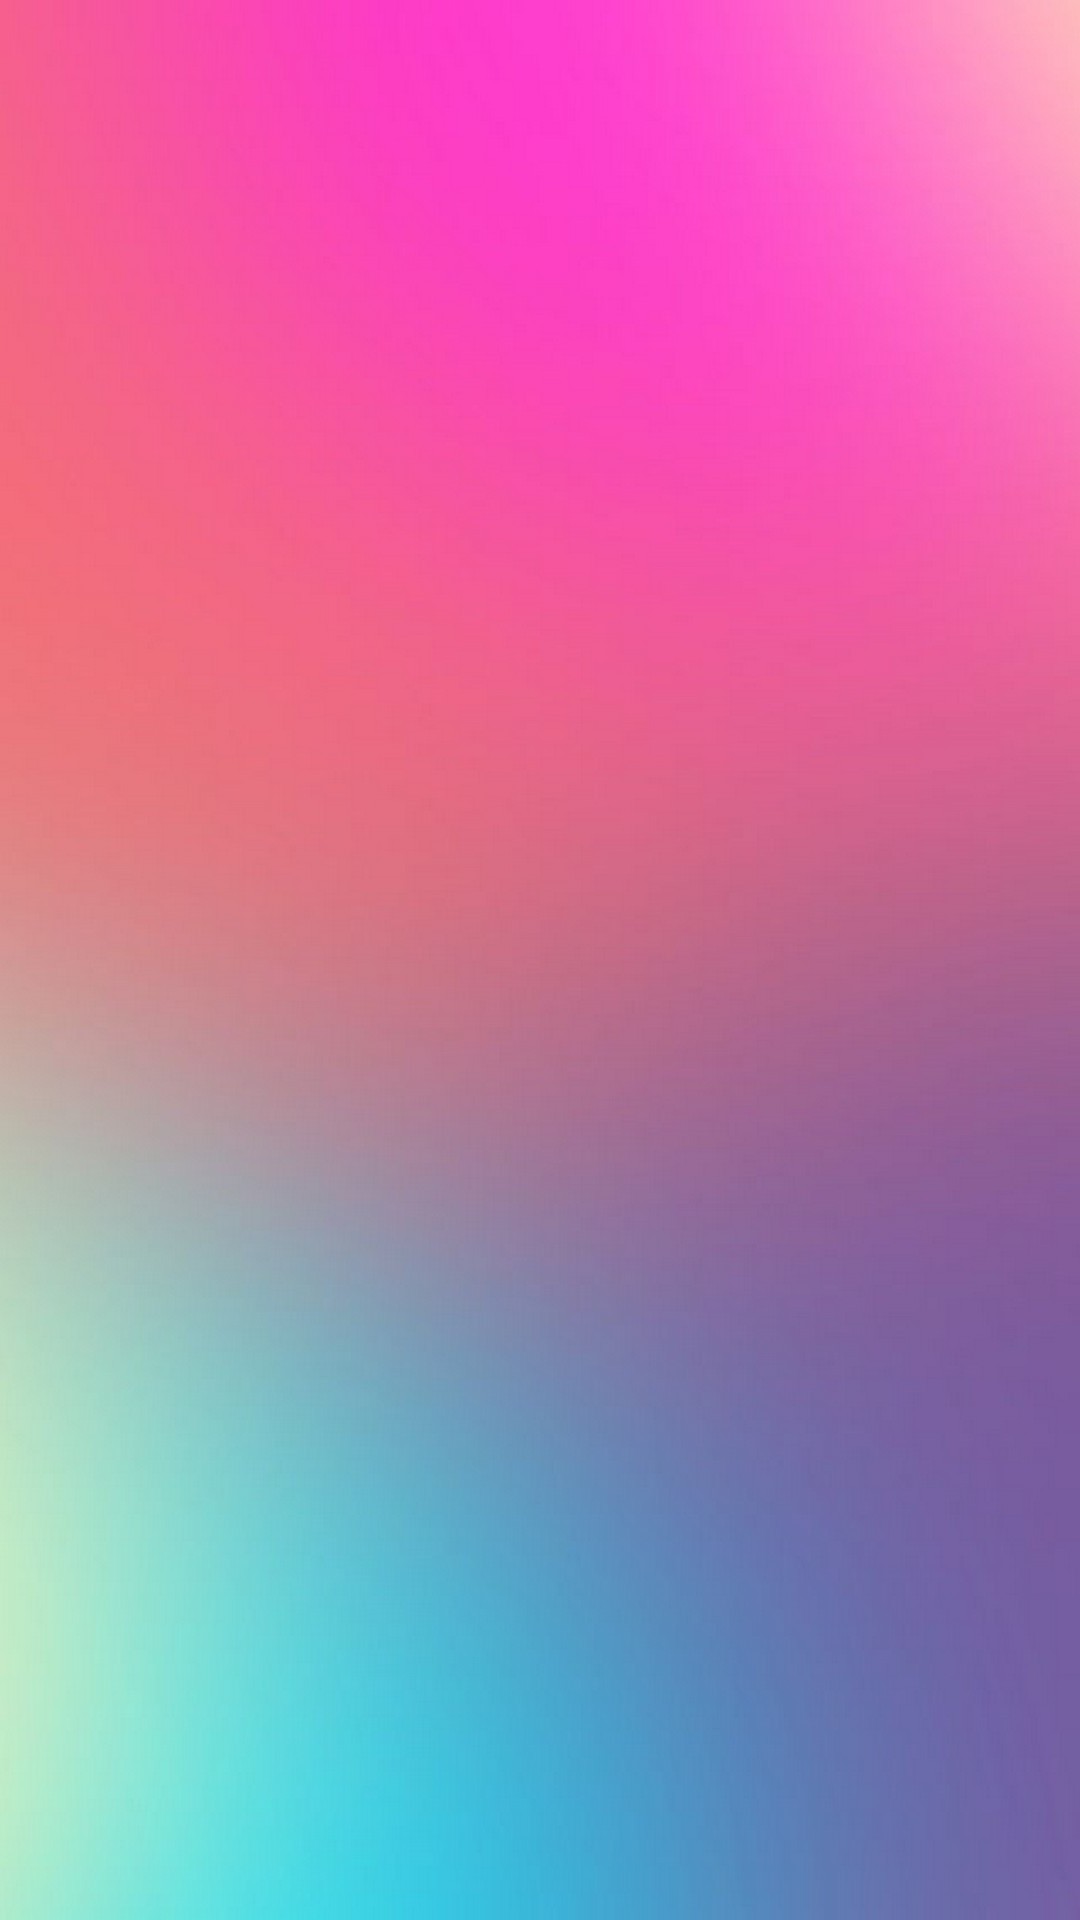 Gradient Wallpaper With High-resolution Pixel - Lilac - HD Wallpaper 